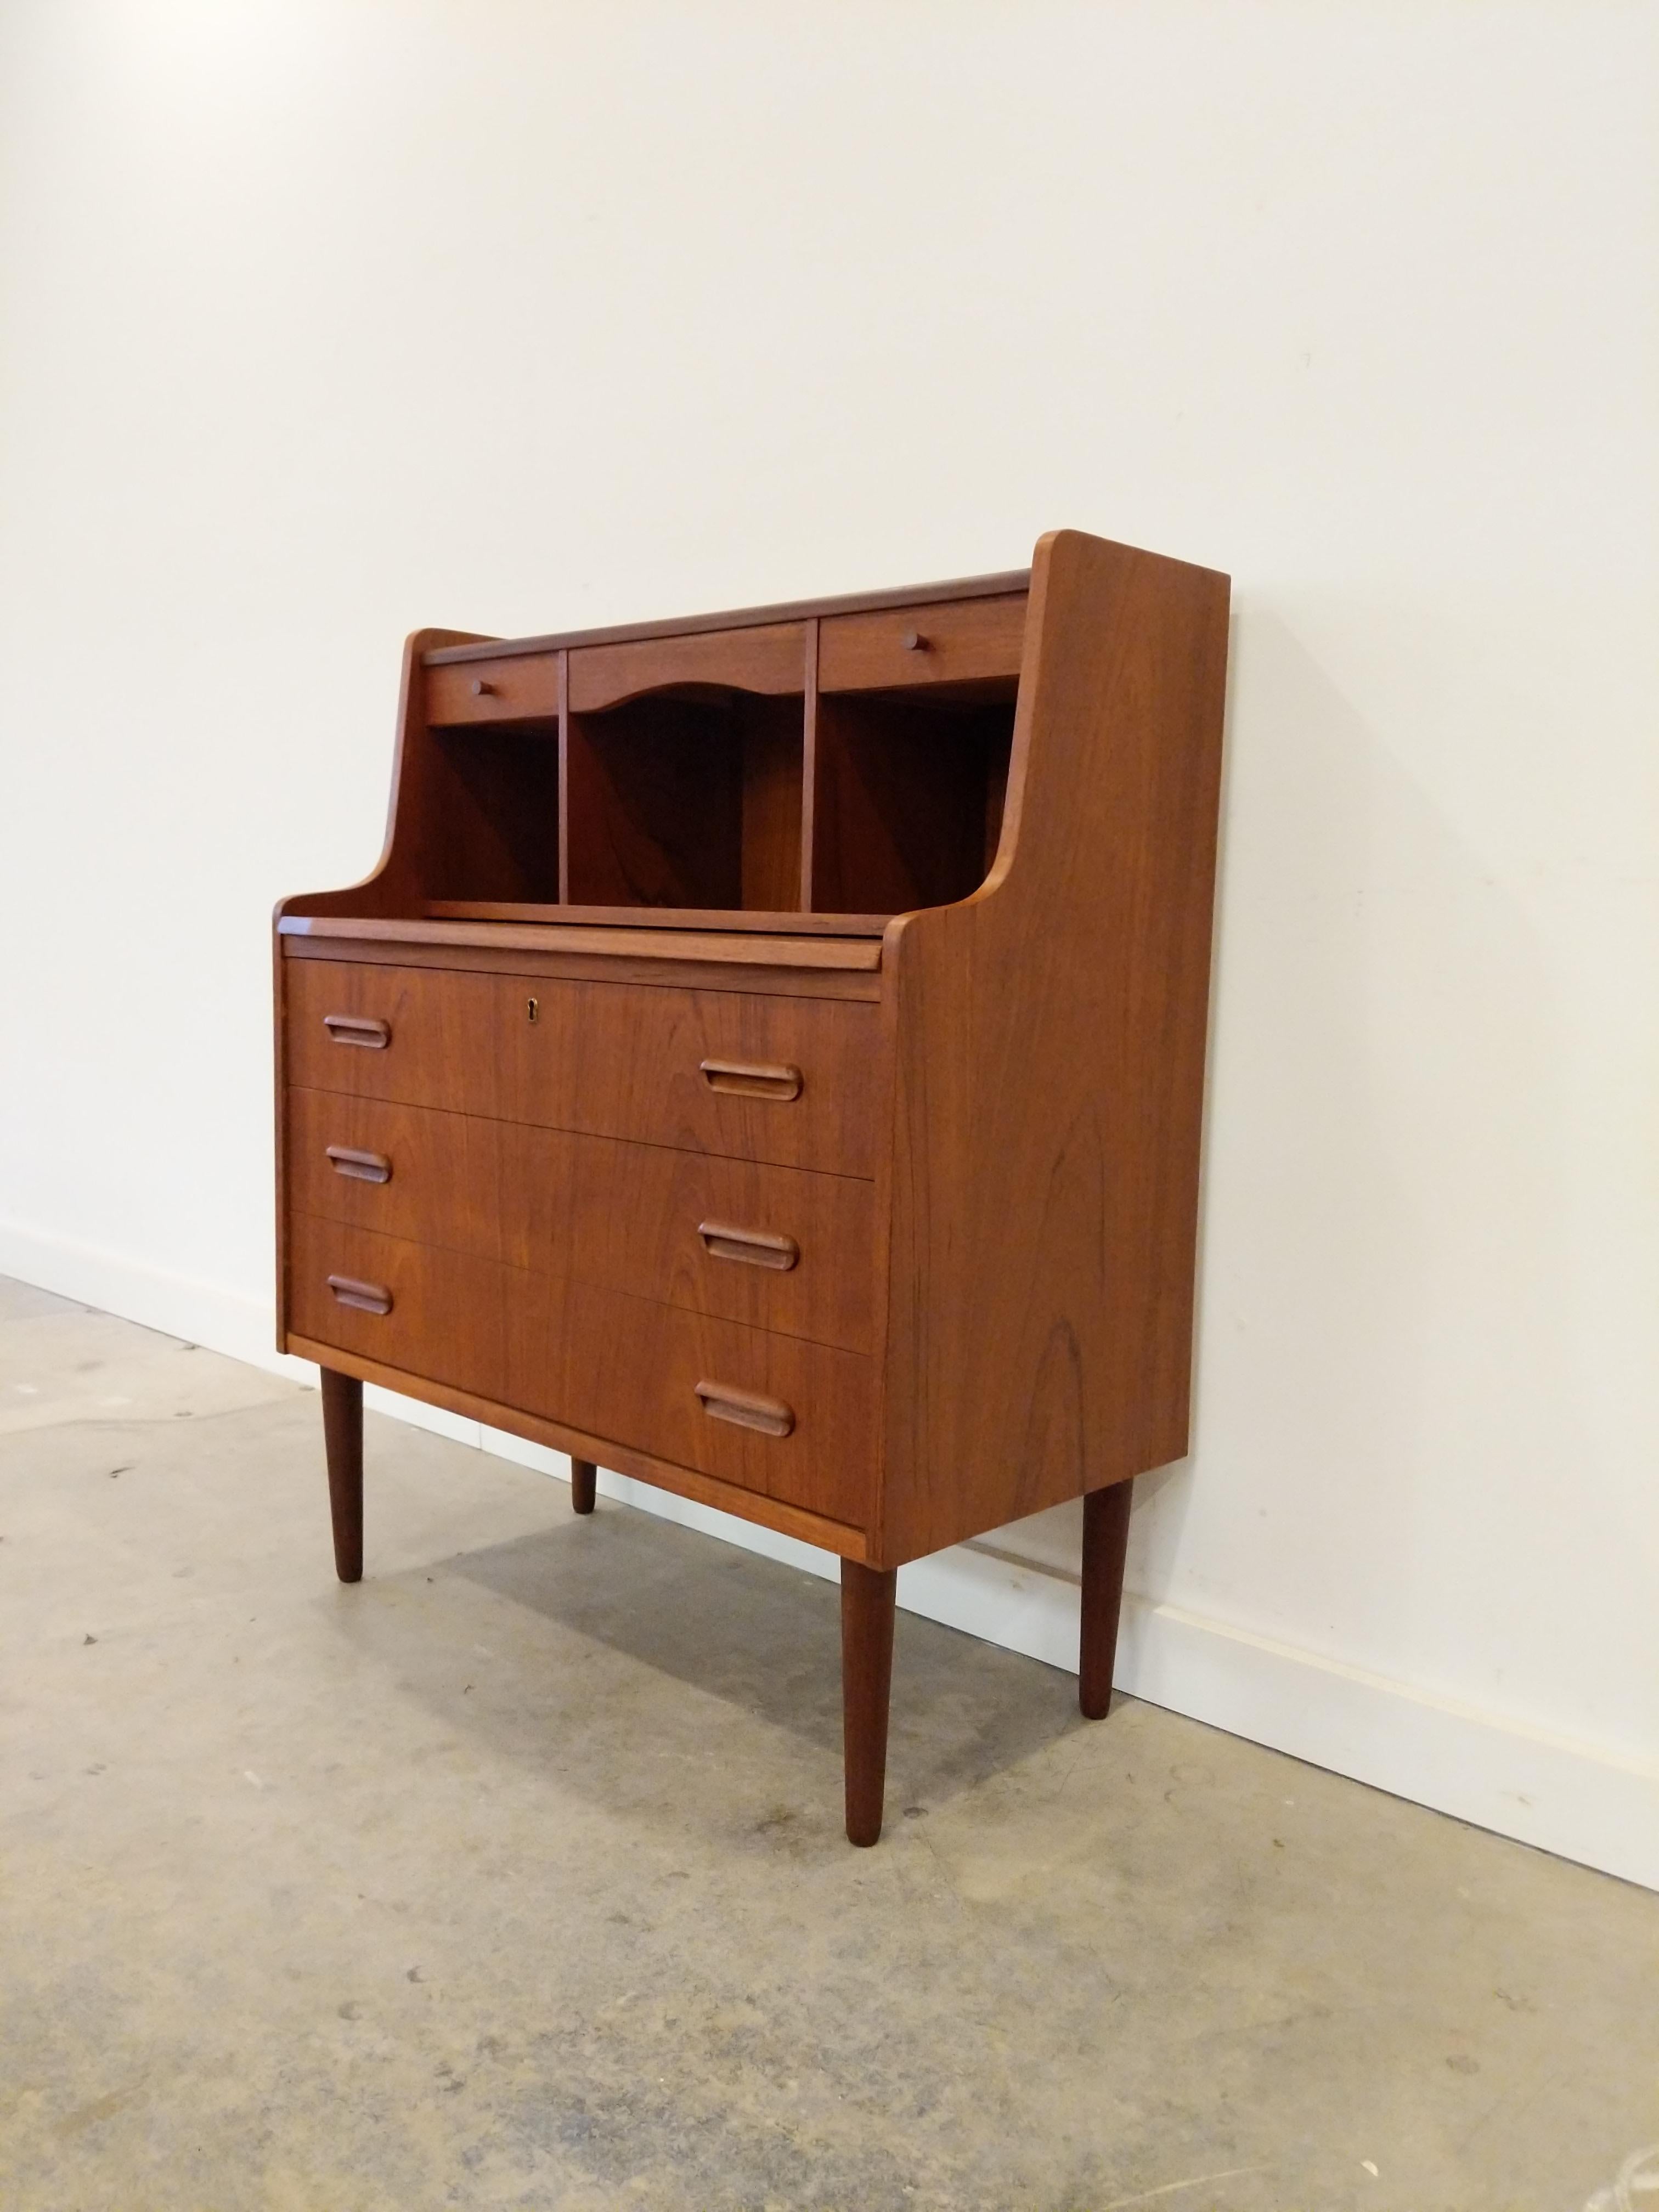 Authentic vintage mid century Danish / Scandinavian Modern teak secretary desk / dresser / chest of drawers / vanity with mirror.

**Mirror has some tarnish**

This piece is in excellent refinished condition with very few signs of age-appropriate